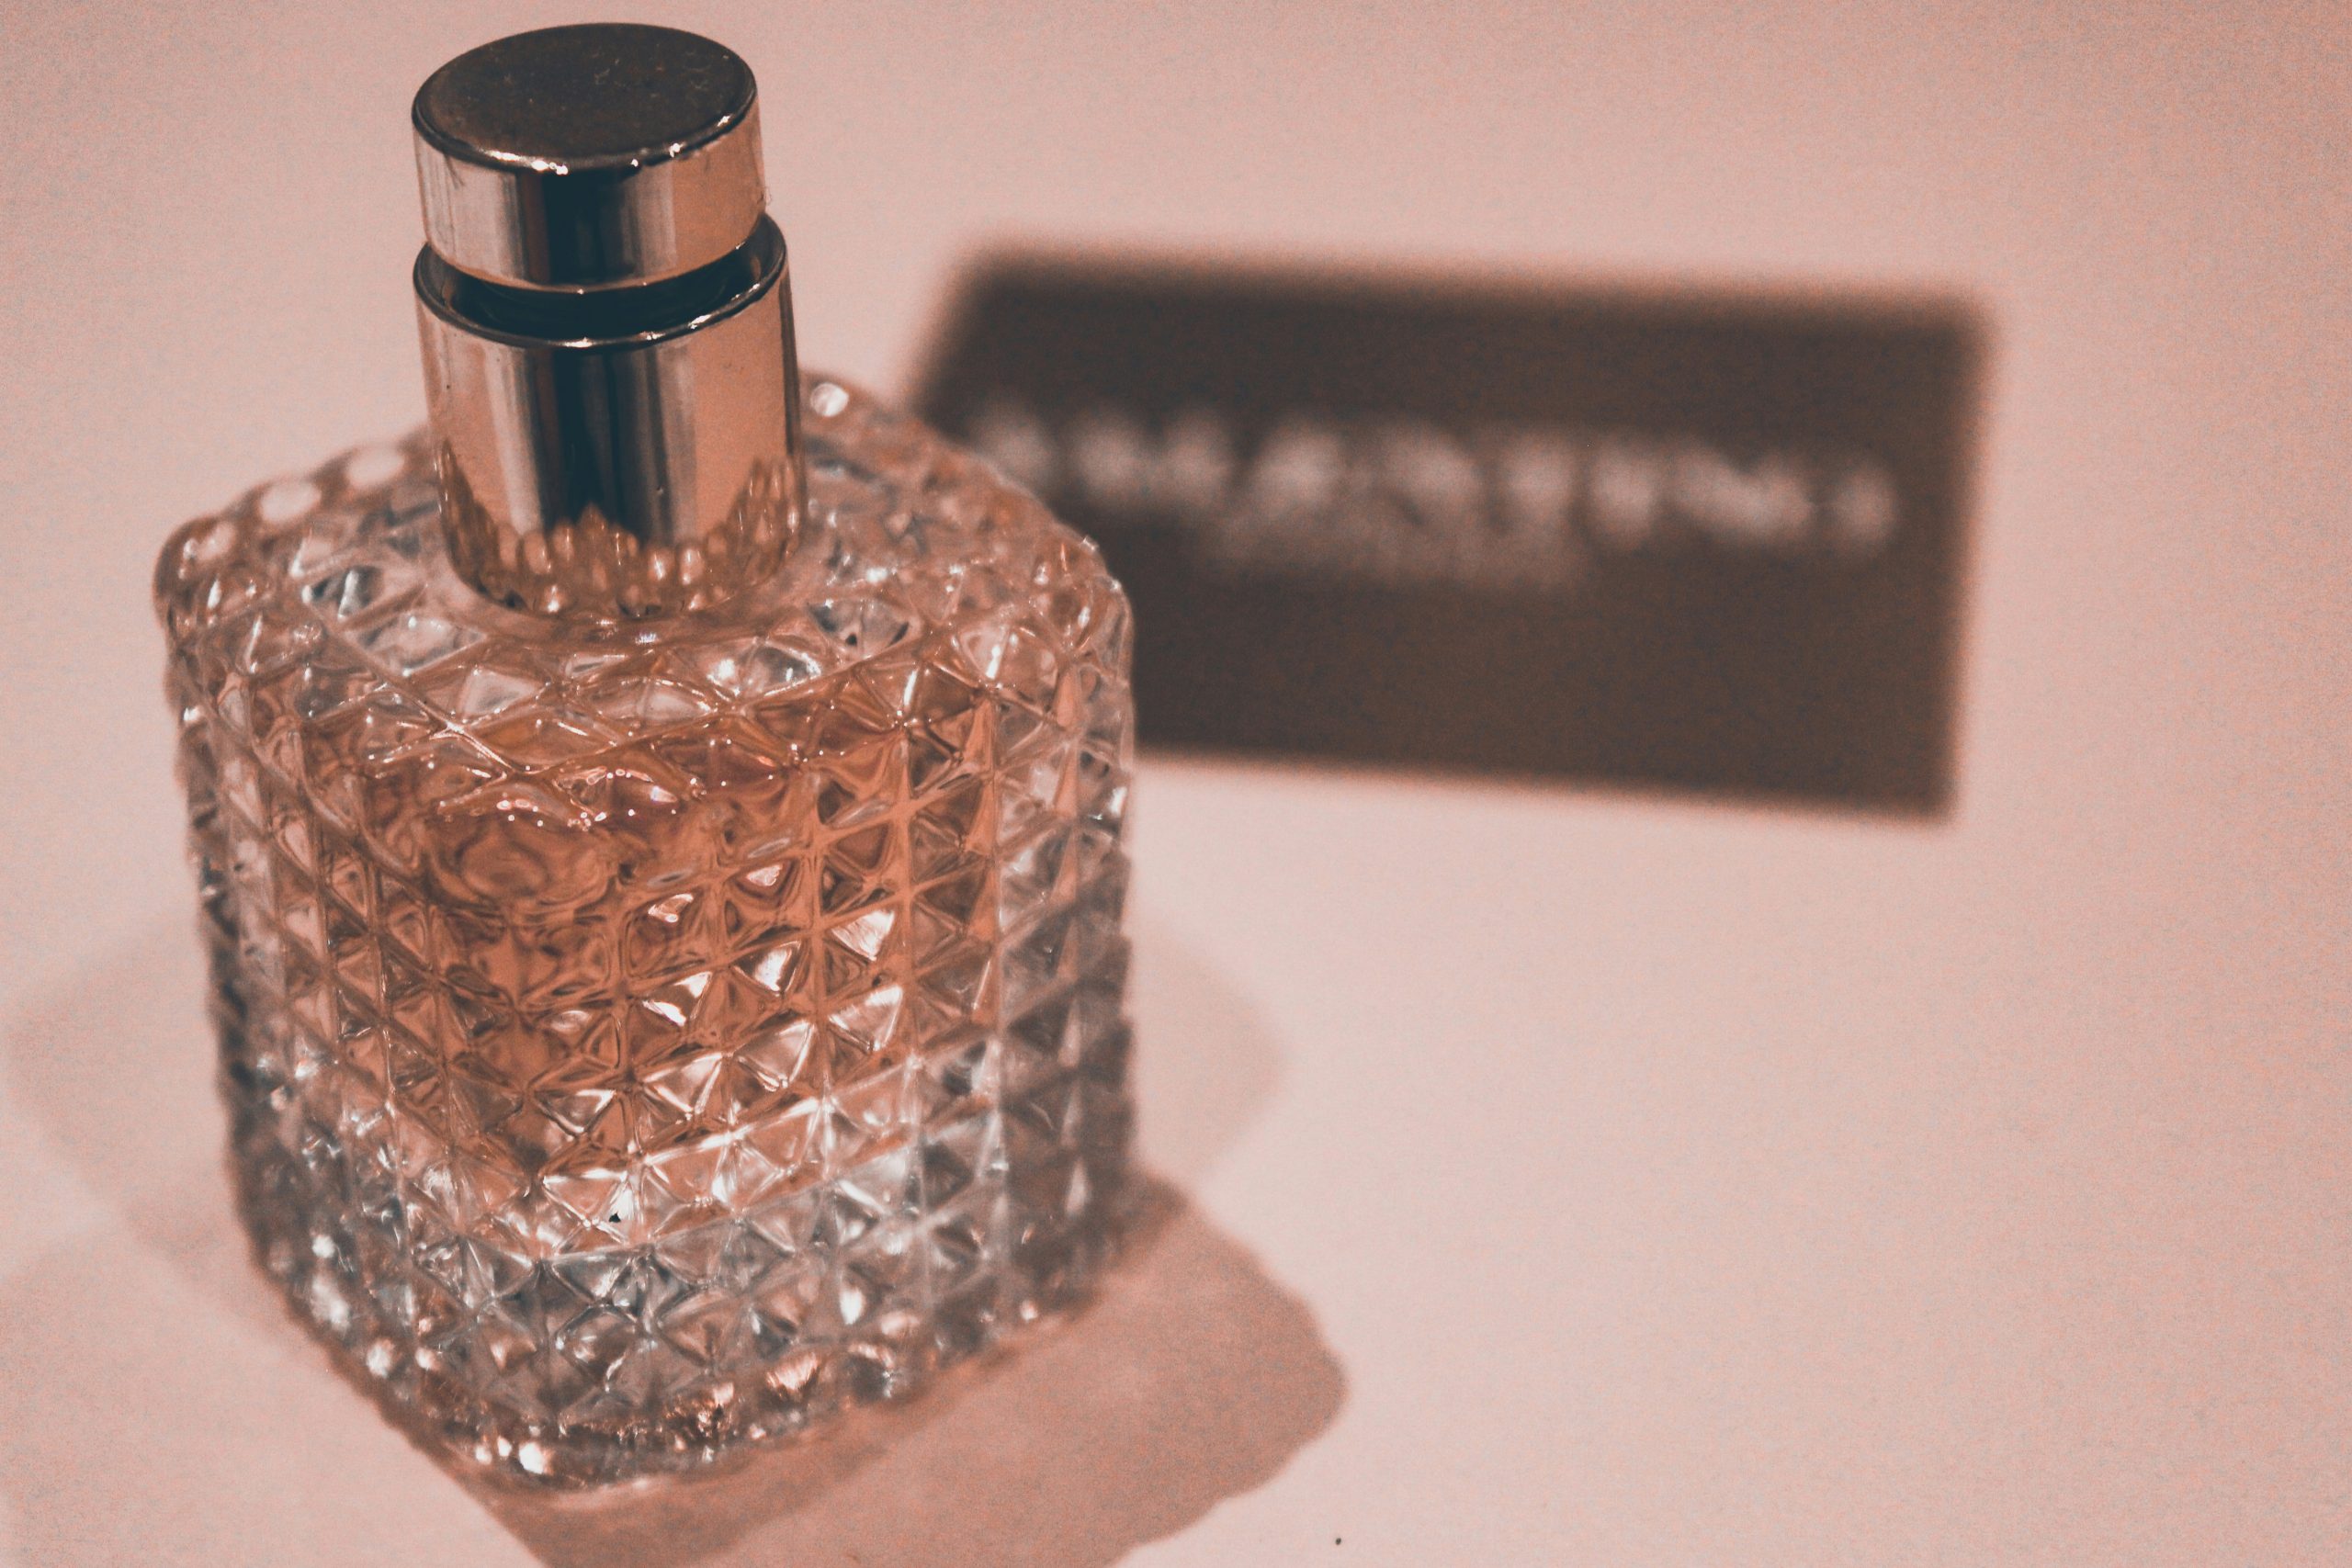 ﻿Travel-Sized Perfume Tips – Smelling Great at the Go